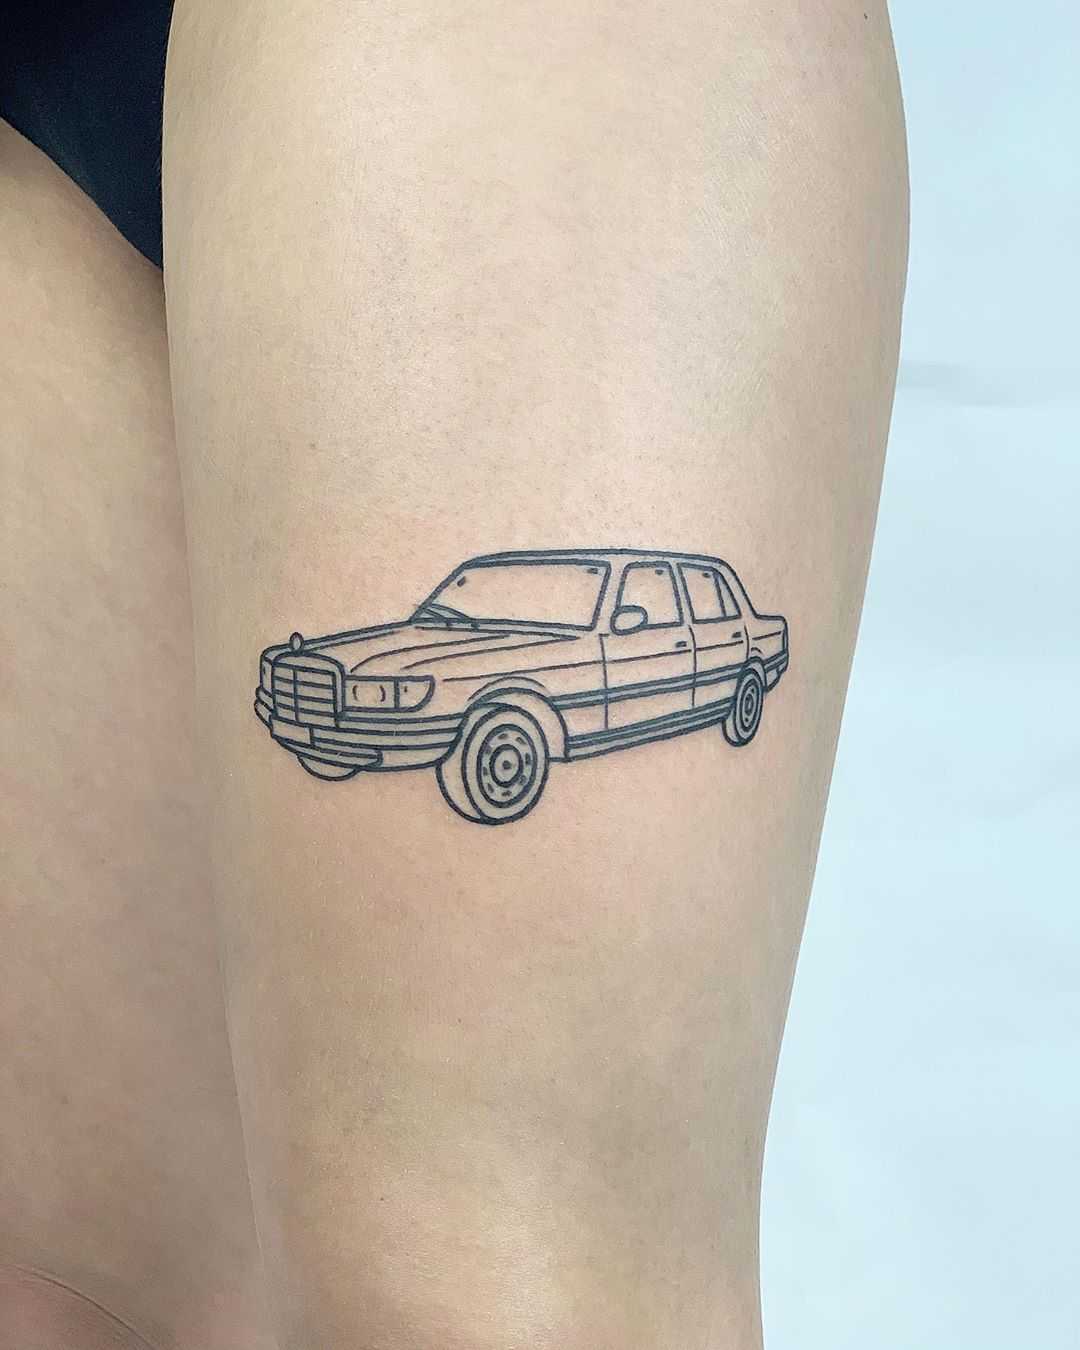 Mercedes S116 tattoo by @themagicrosa